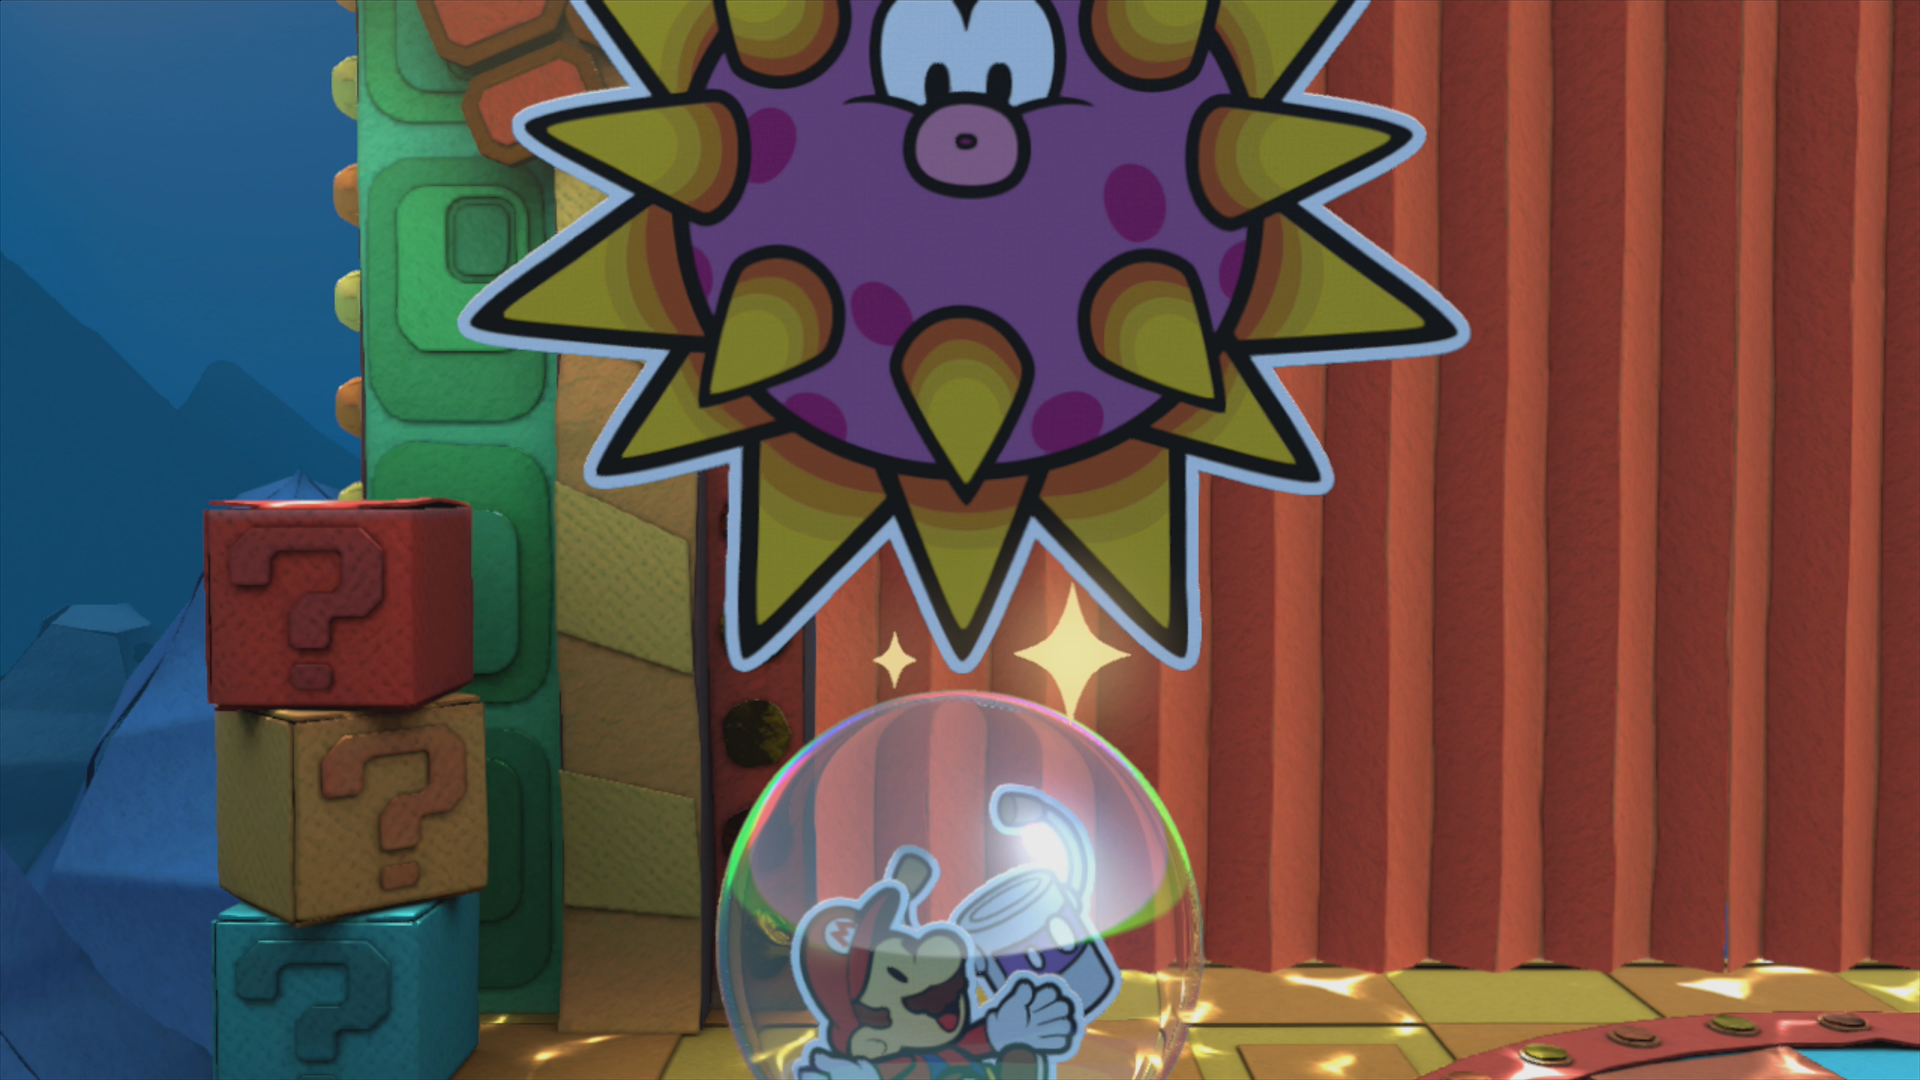 Paper Mario getting killed